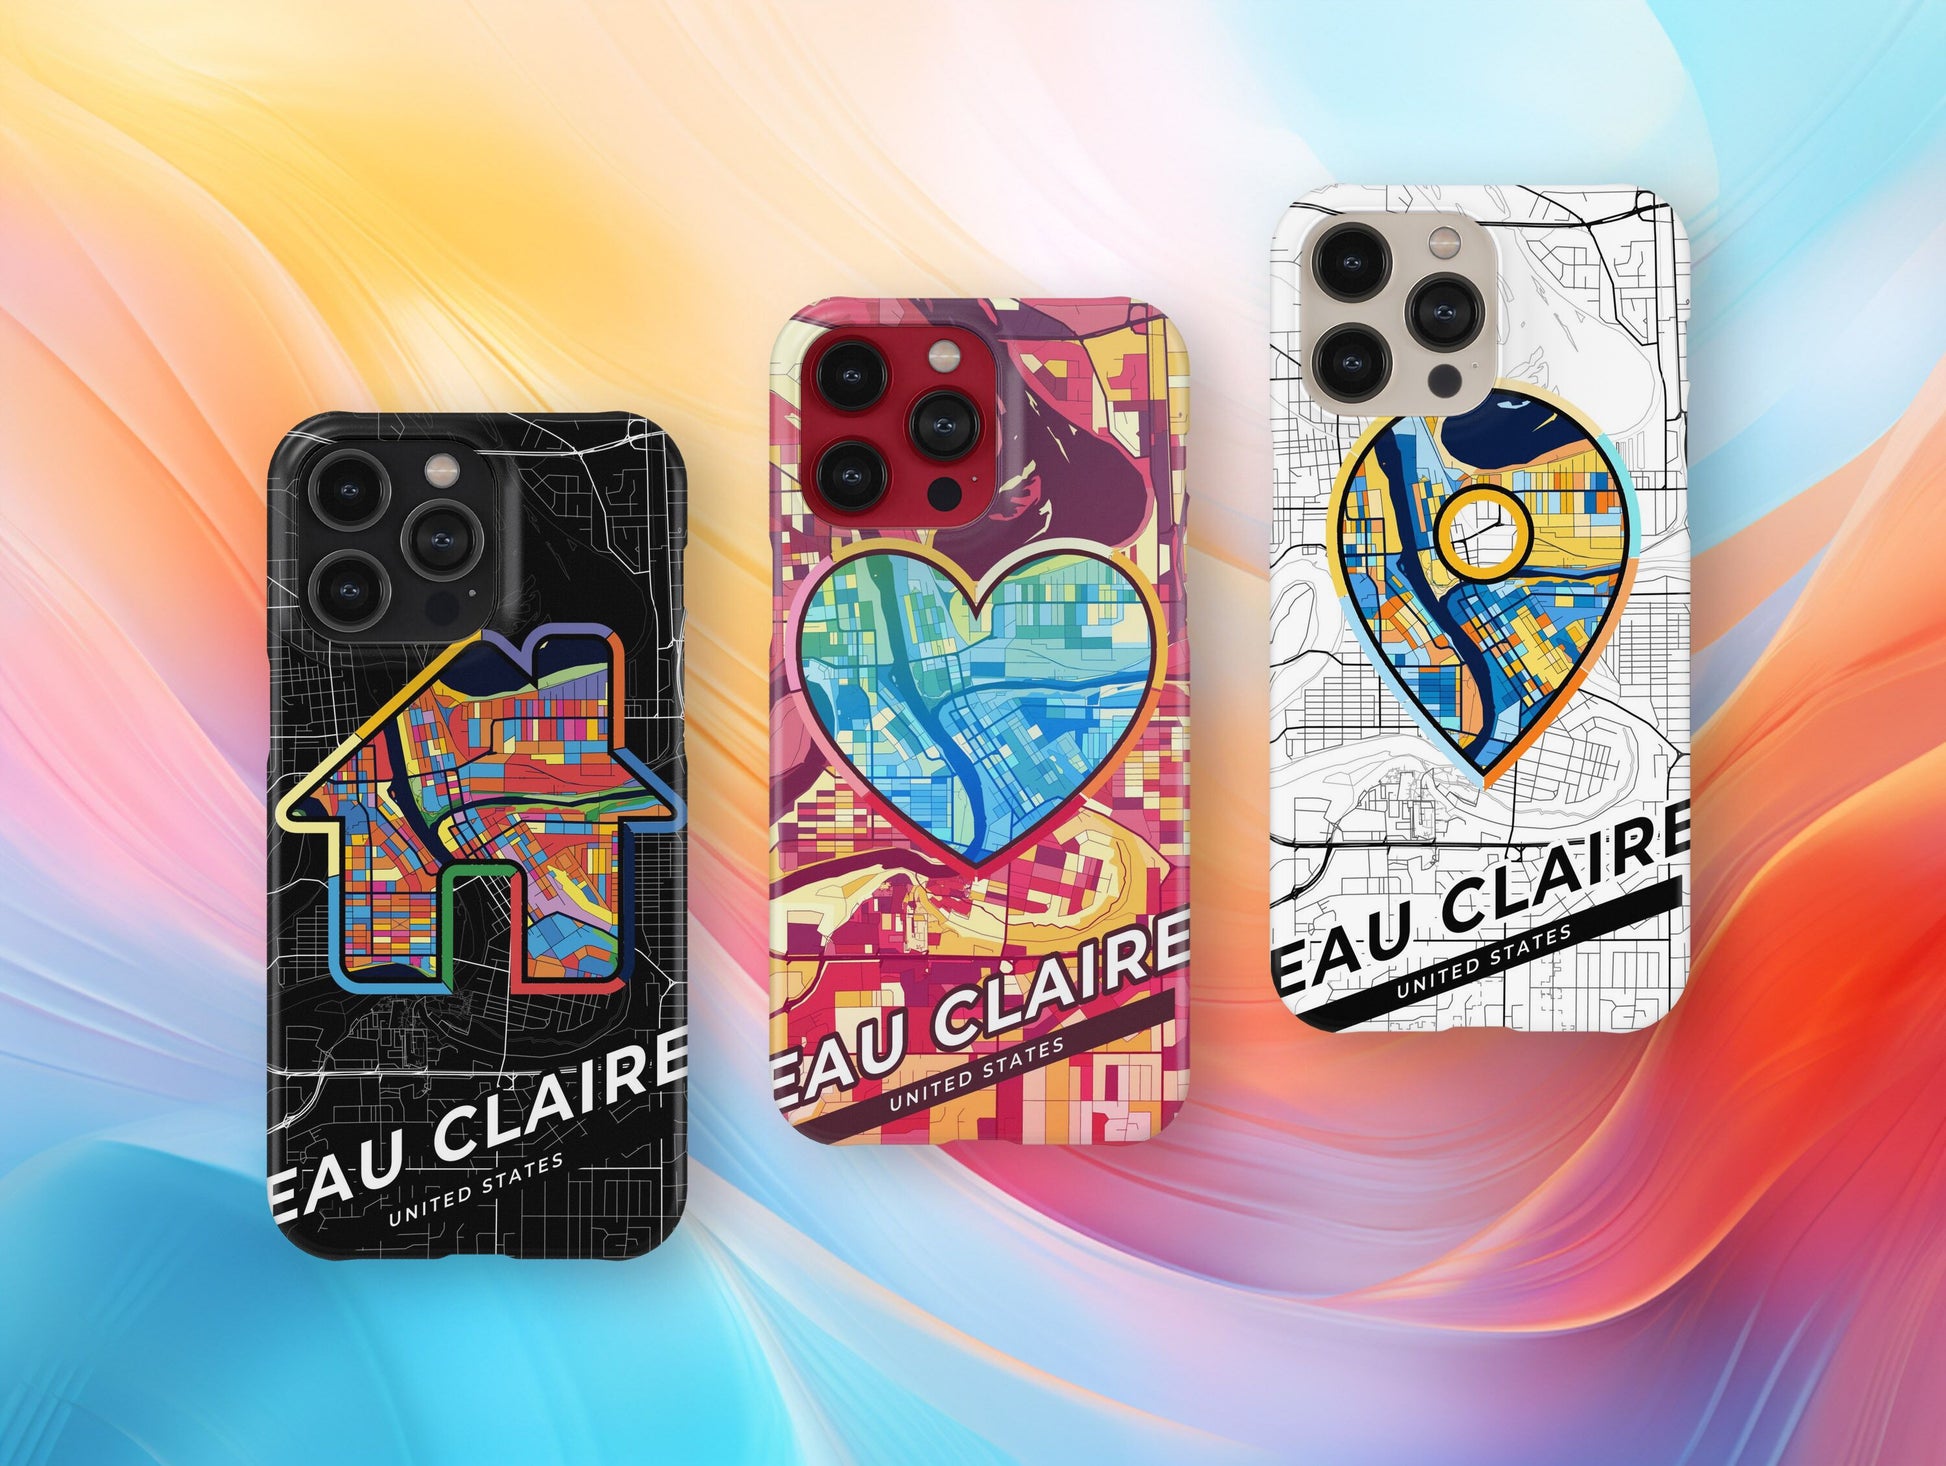 Eau Claire Wisconsin slim phone case with colorful icon. Birthday, wedding or housewarming gift. Couple match cases.